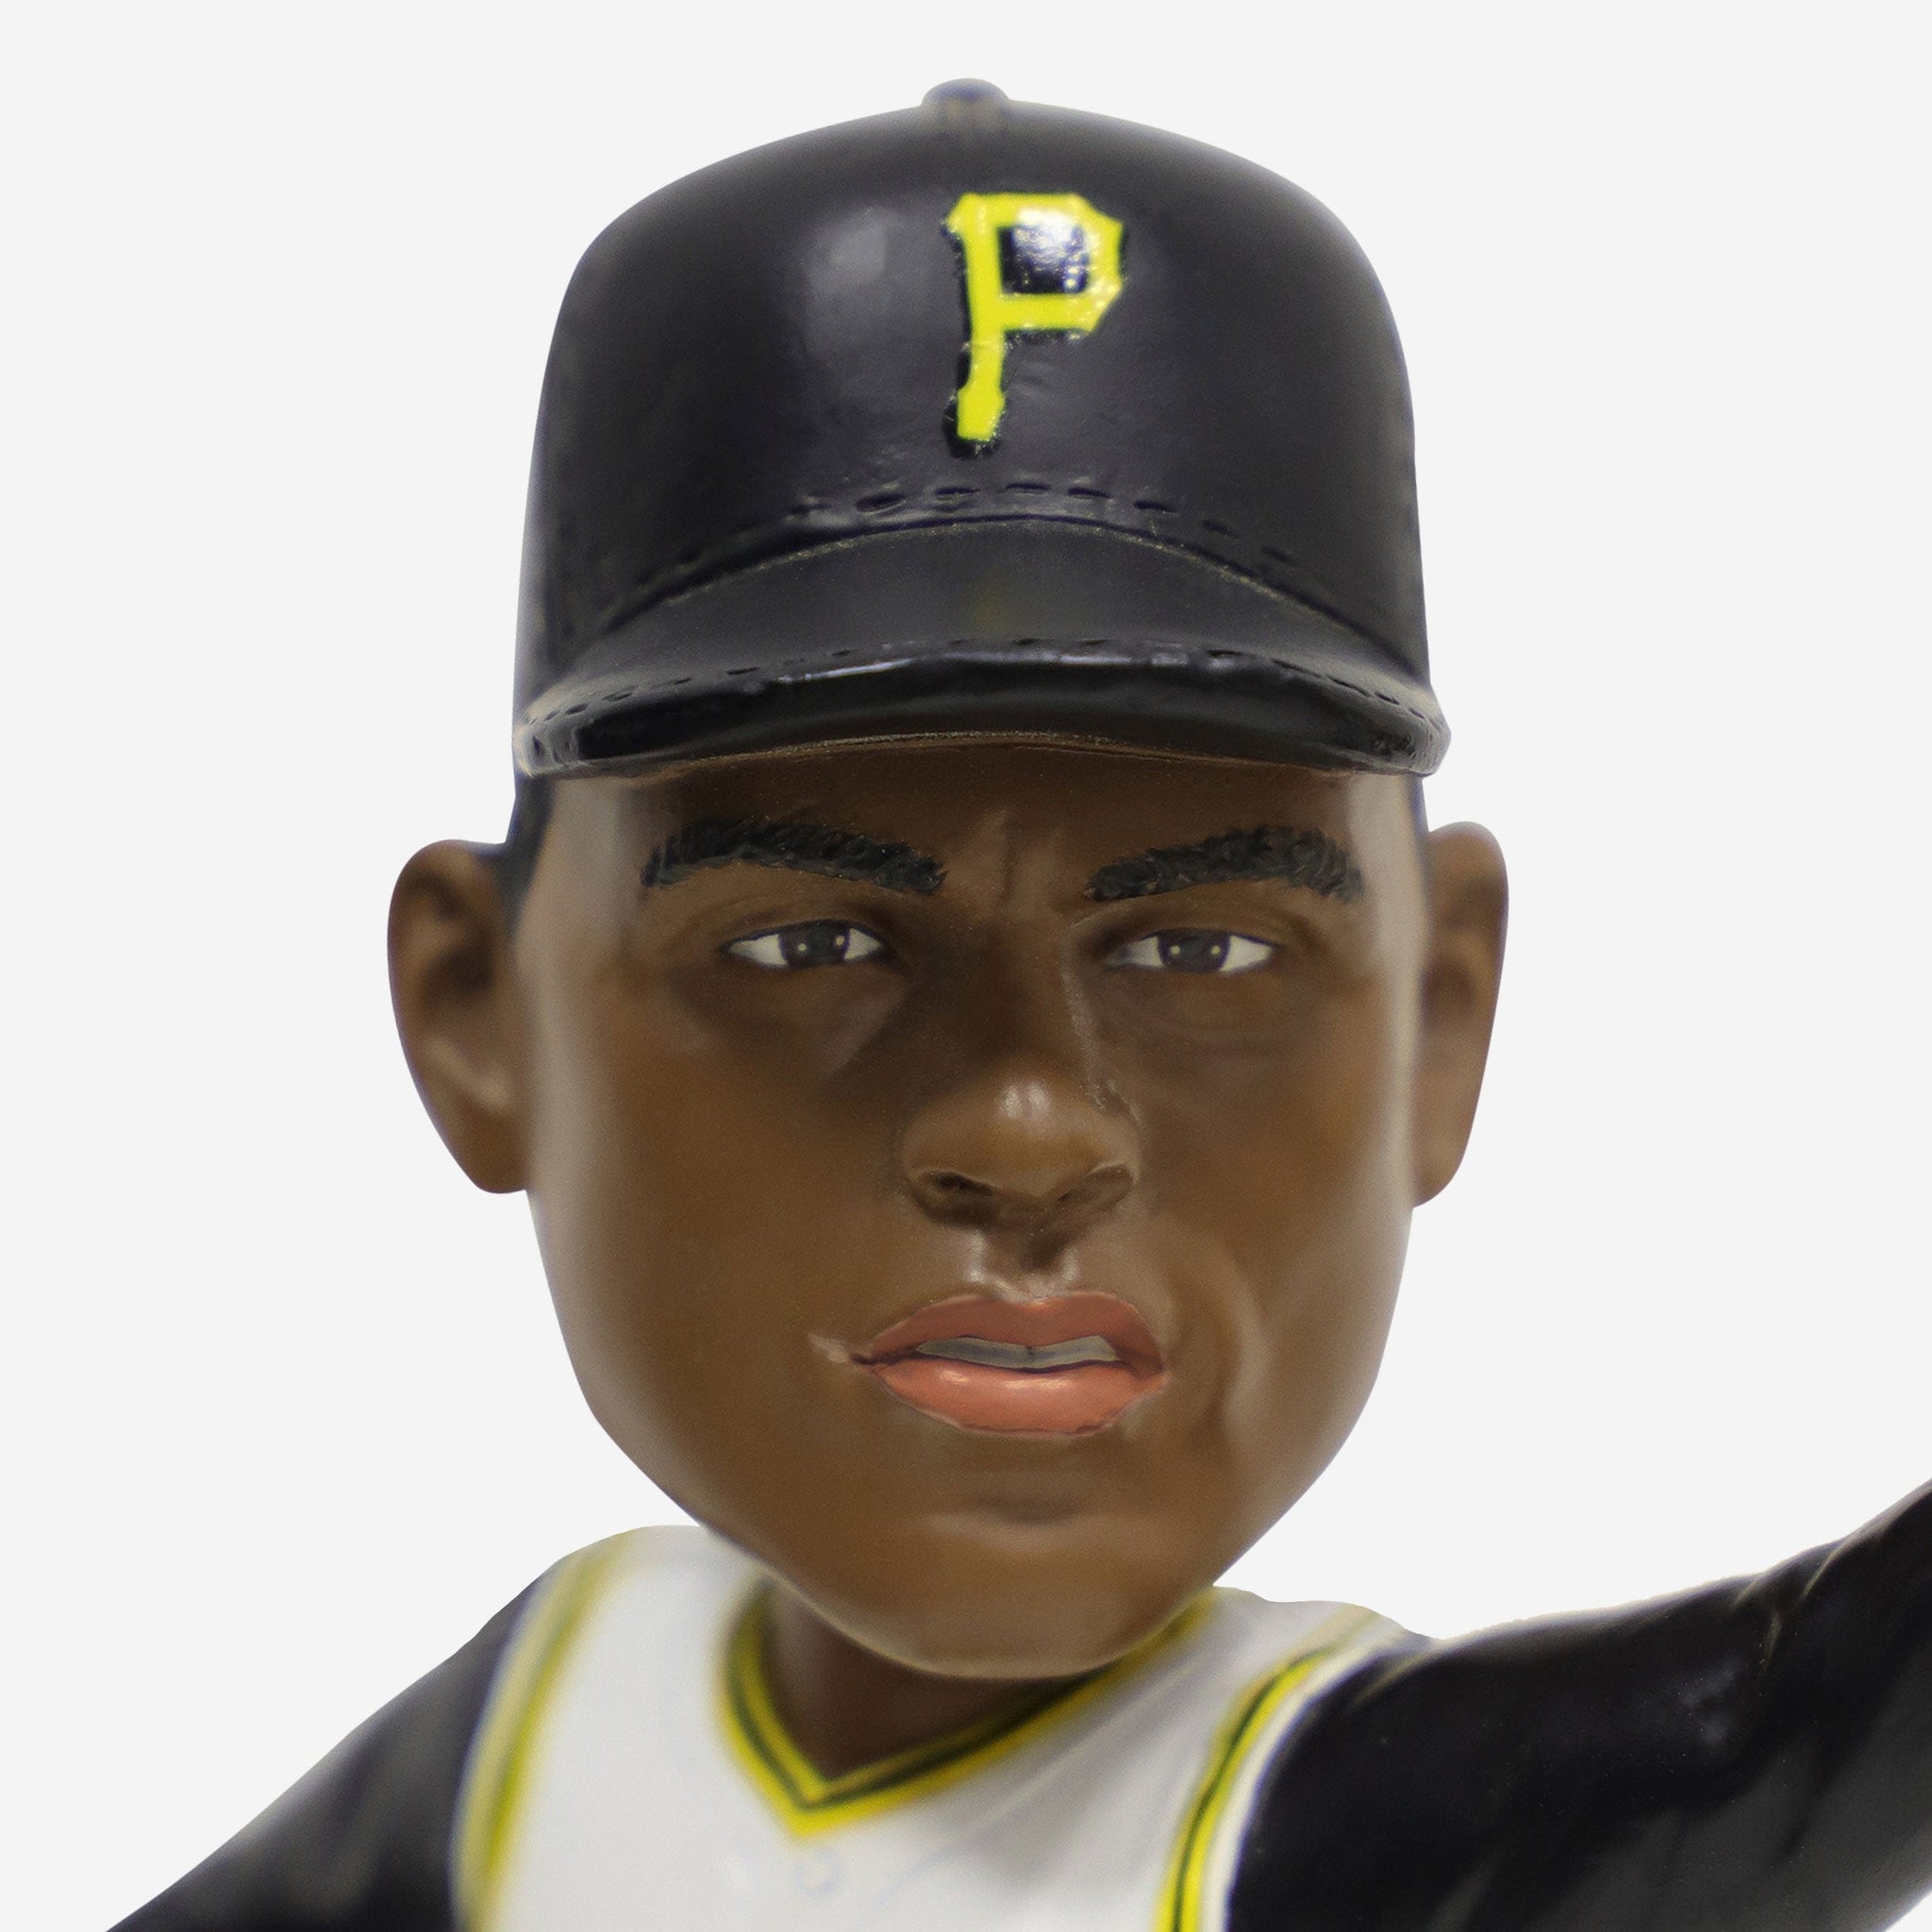 FOCO launches Roberto Clemente collectibles, including a 3-foot